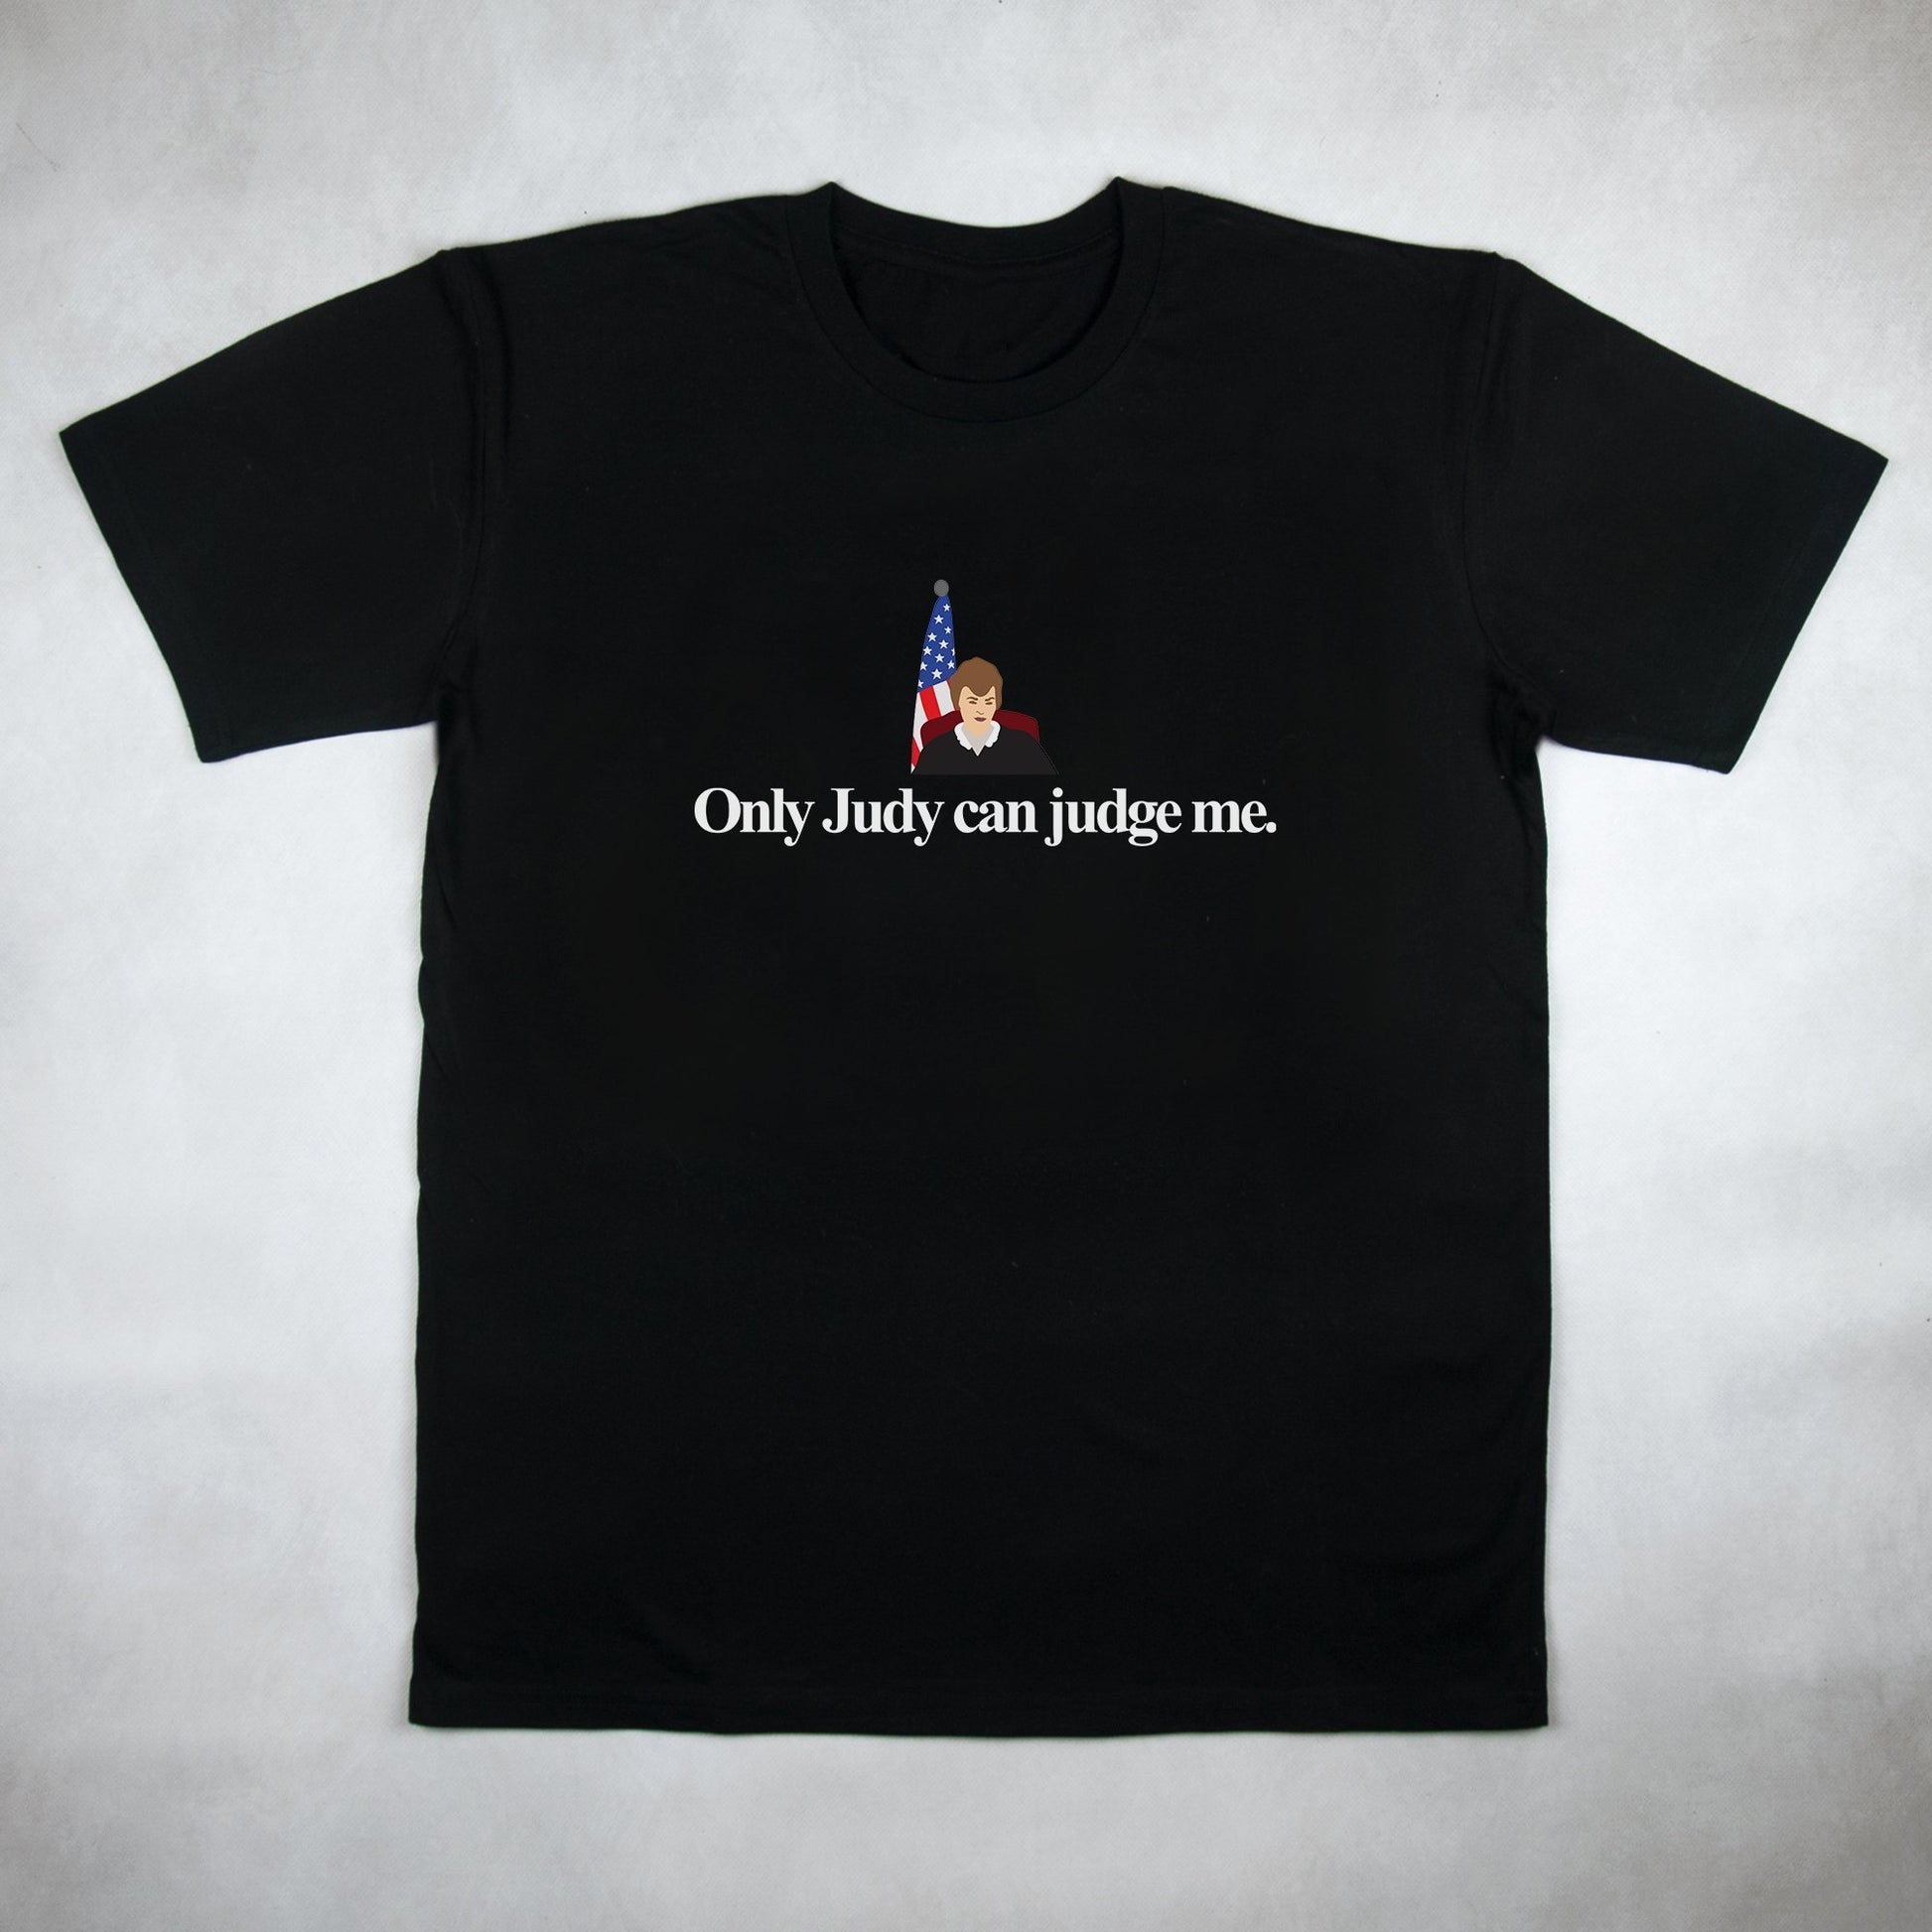 Classy Duds Short Sleeve T-Shirts S / Black / Standard Only Judy Can Judge Me Tee